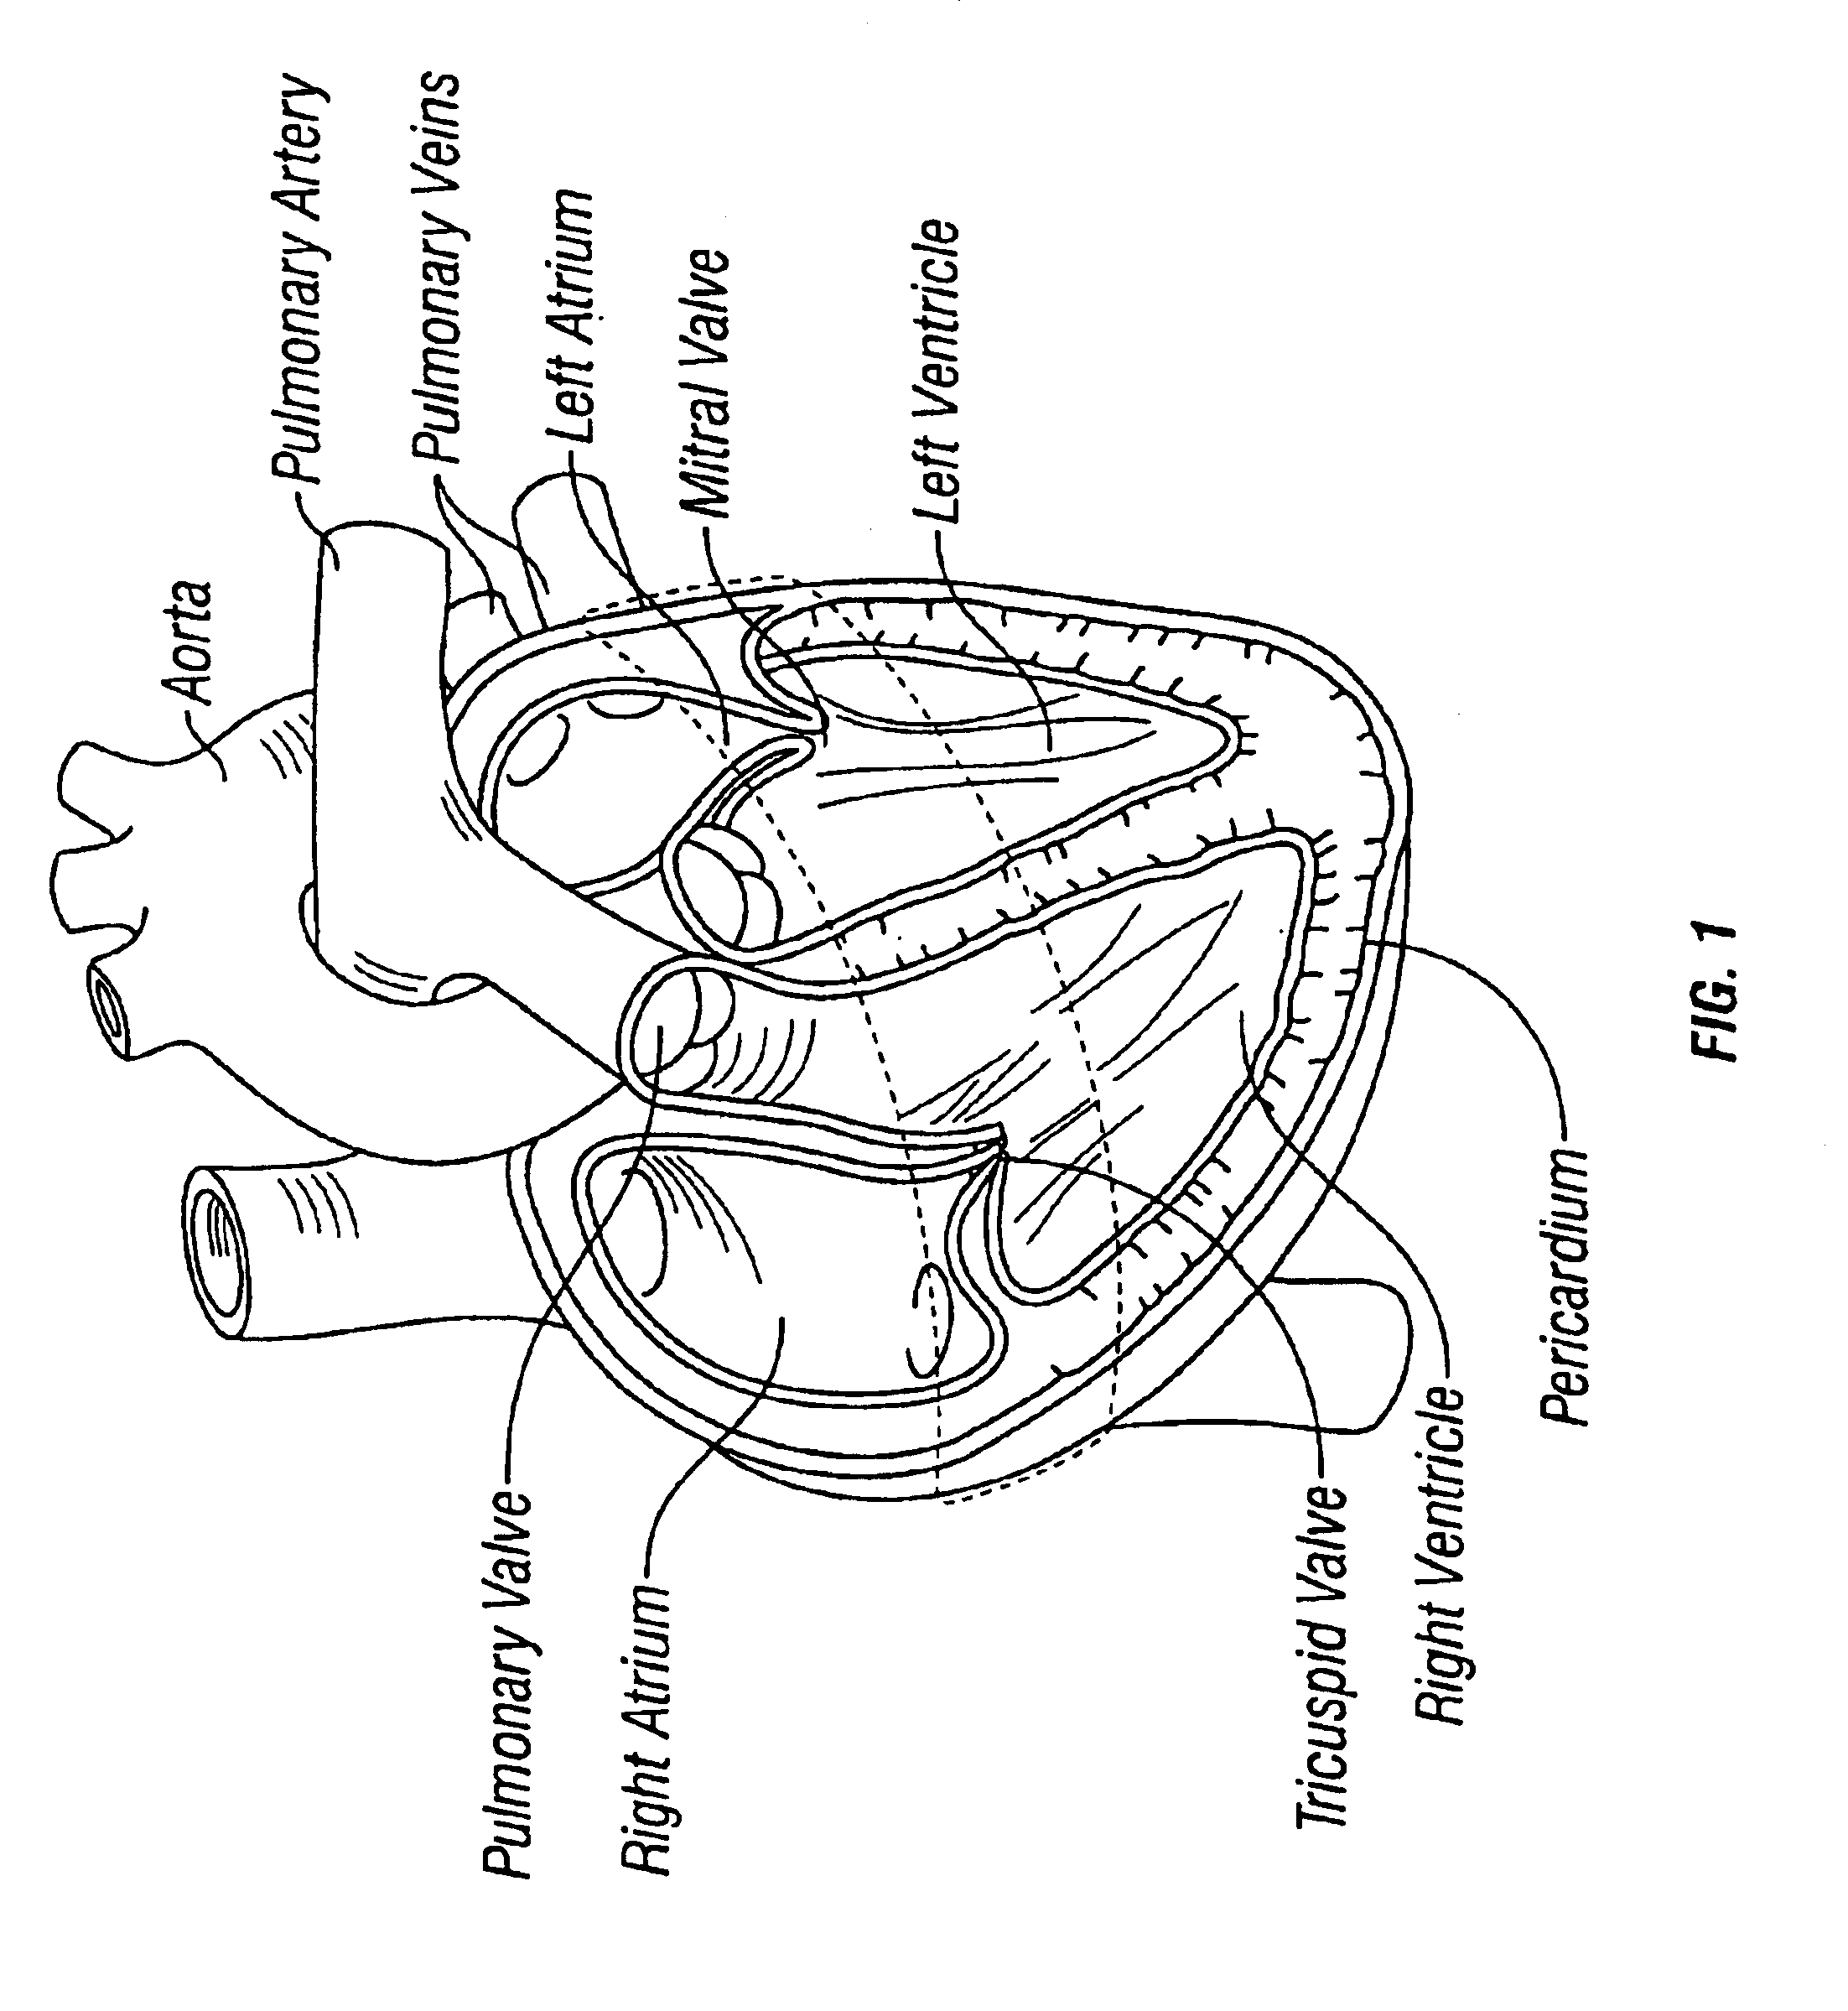 Method and apparatus for external stabilization of the heart